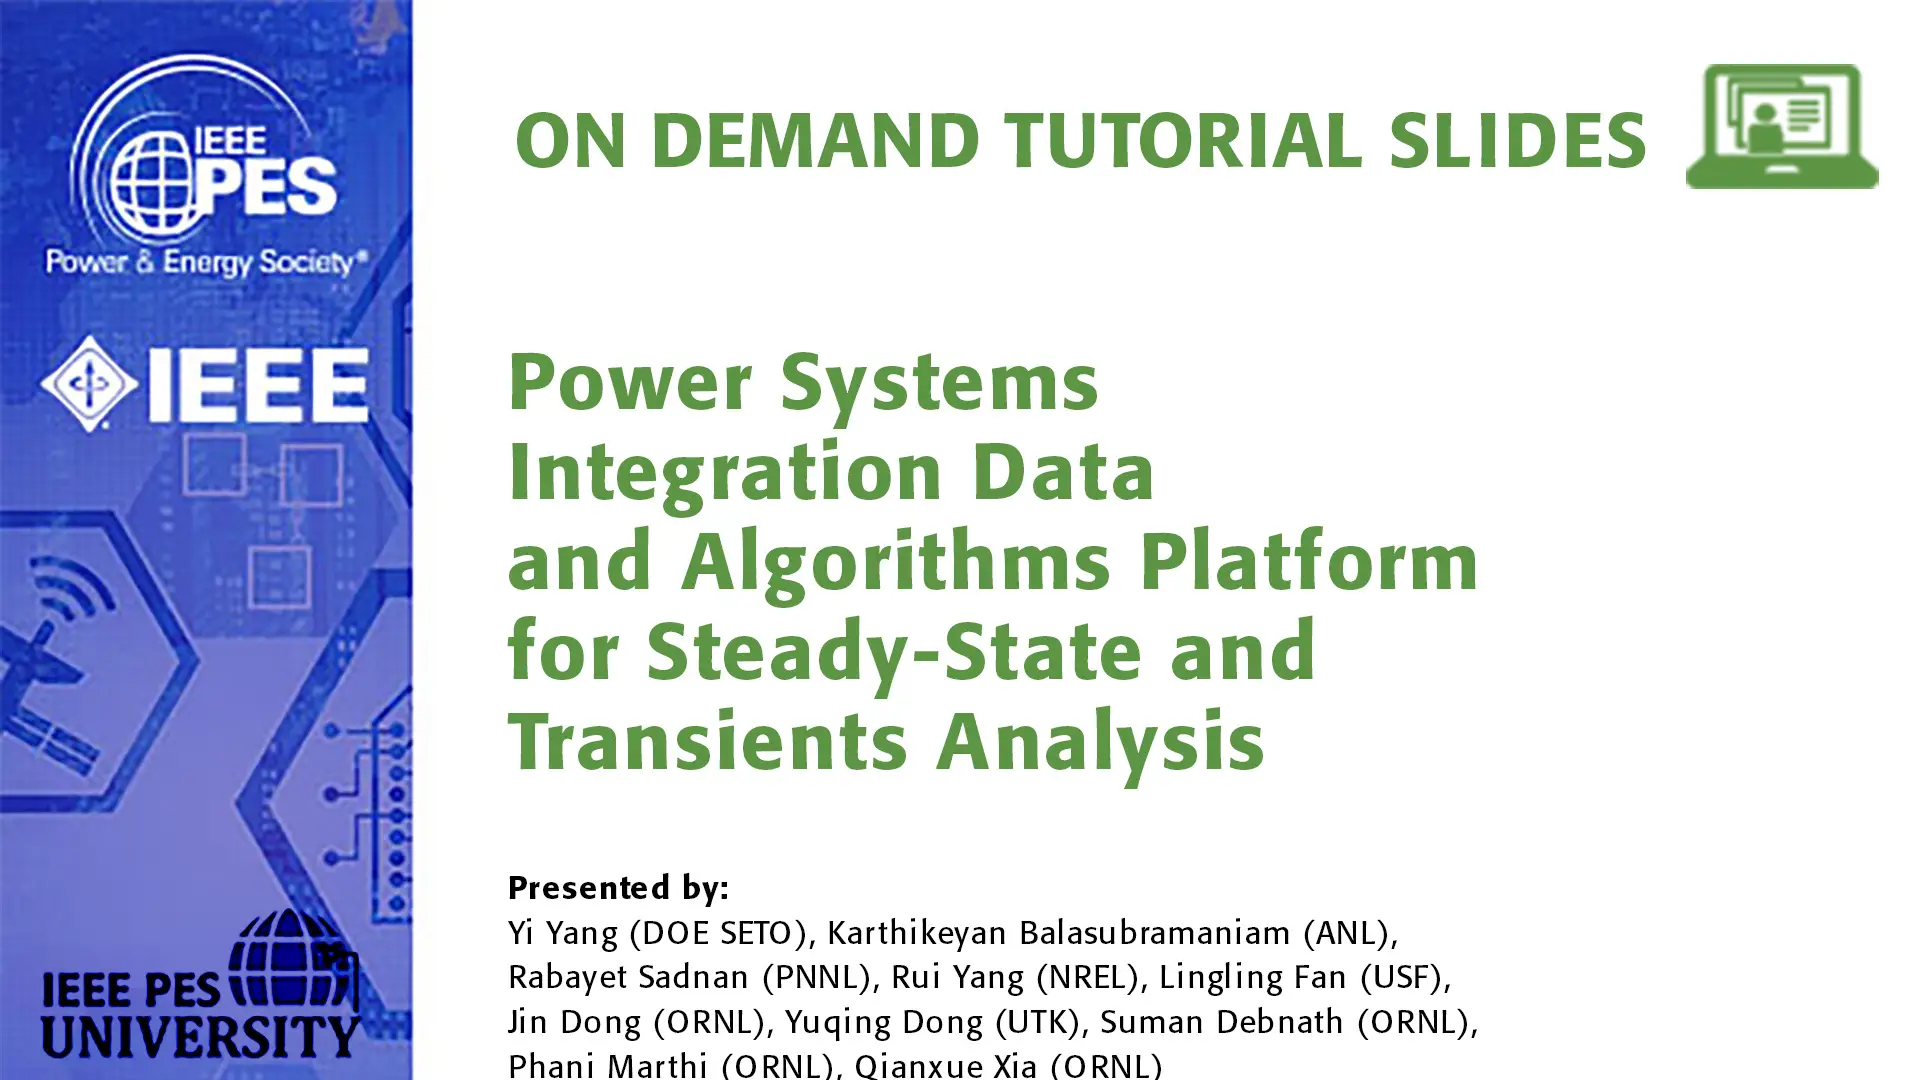 GM 24 Tutorial - Power Systems Integration Data and Algorithms Platform for Steady-State and Transients Analysis  (Slides)